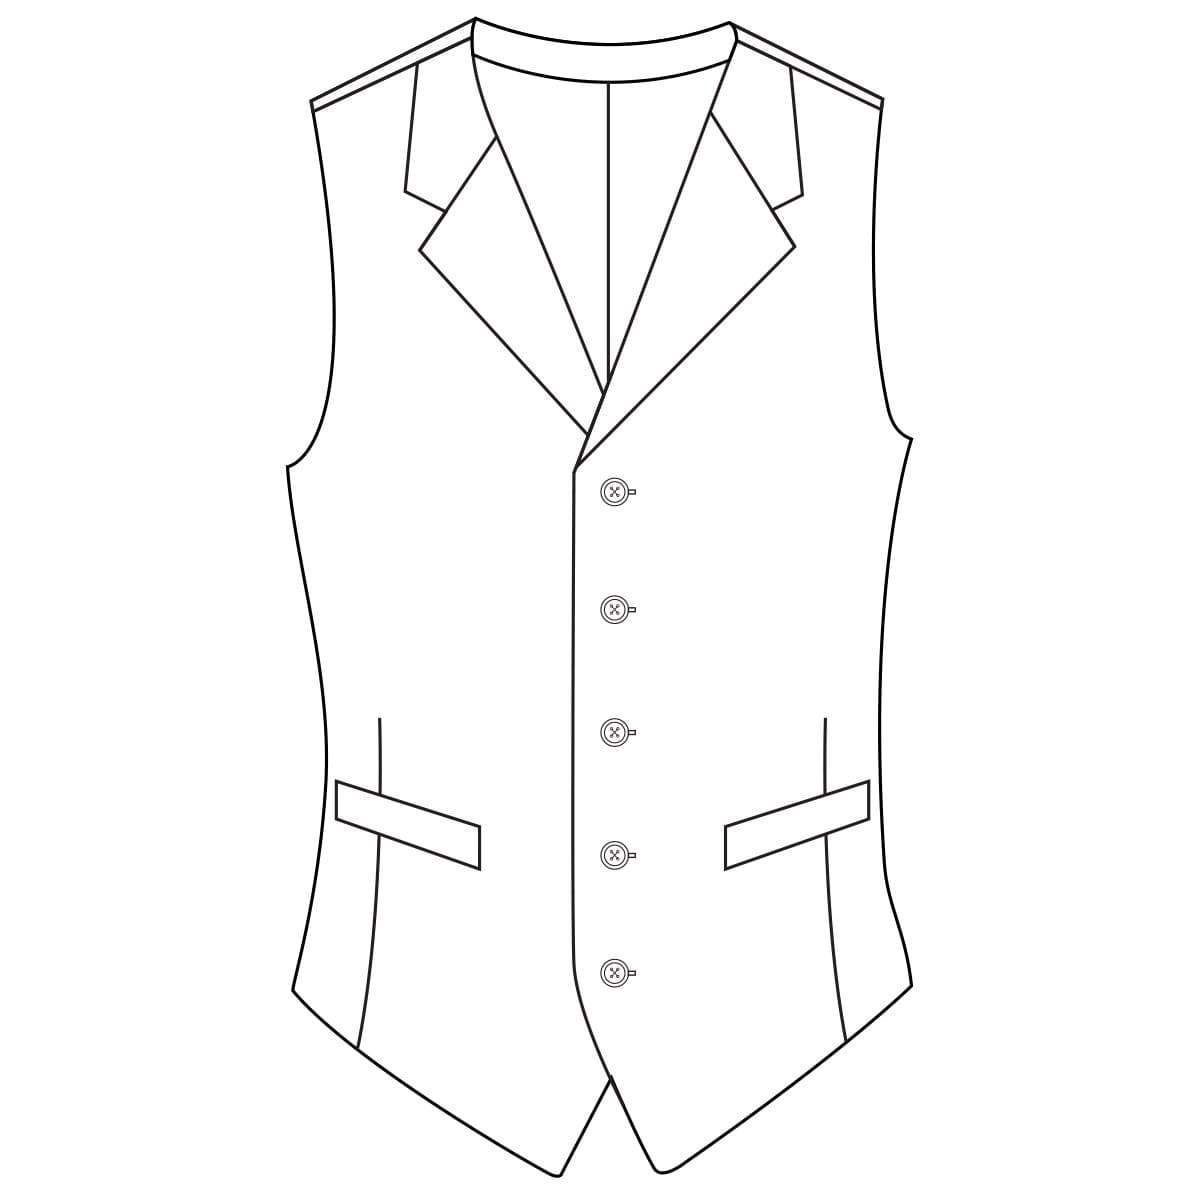 Sleeveless Jacket Lapelled Vest Waistcoat Technical Fashion Illustration  with Notched Collar, Button-up, Fitted Body Stock Vector - Illustration of  jacket, flat: 221810654